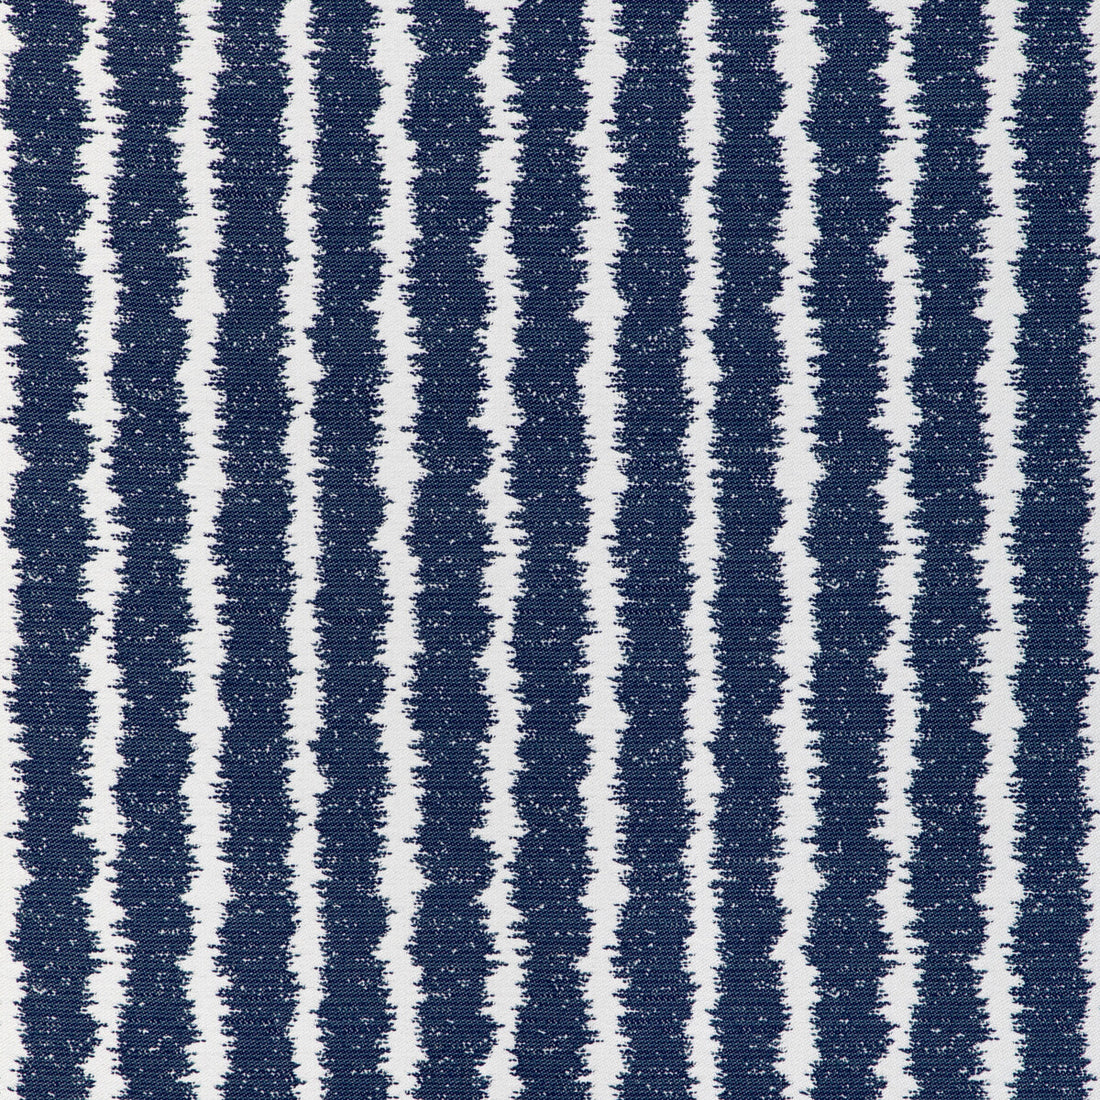 Seaport Stripe fabric in marine color - pattern 36917.5.0 - by Kravet Couture in the Riviera collection